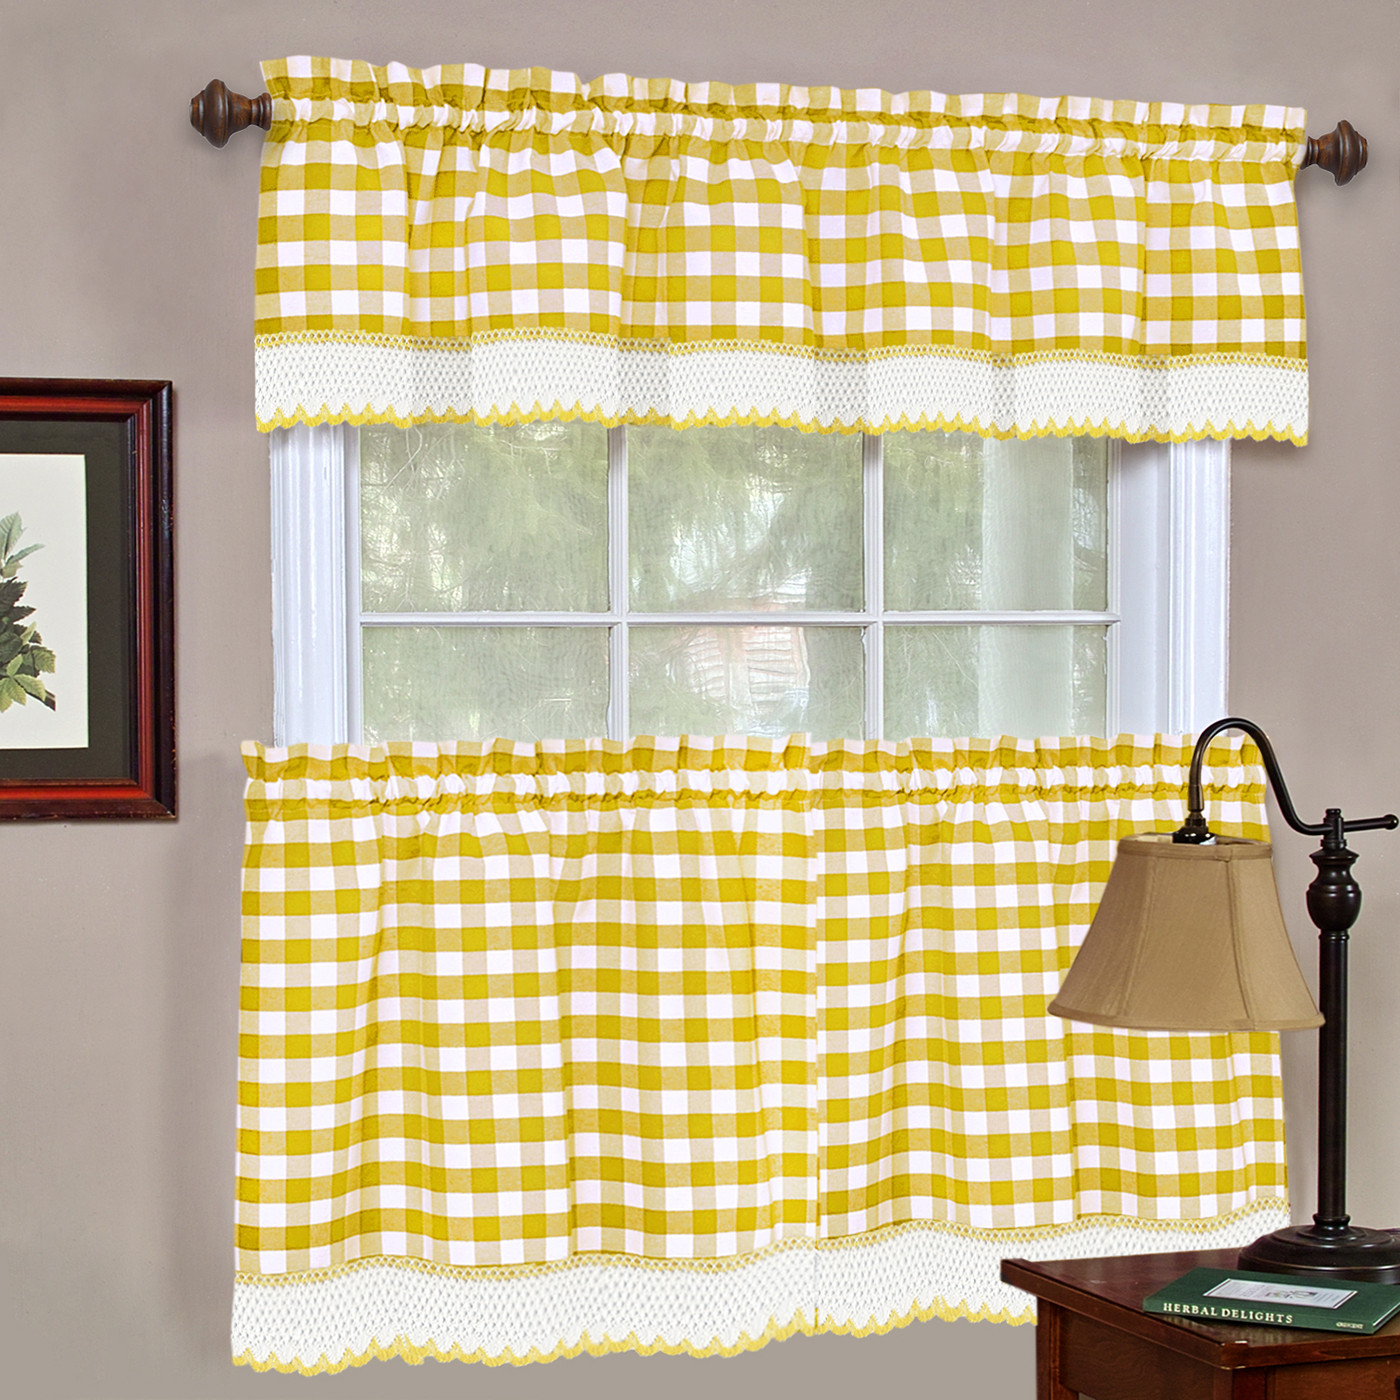 Gingham Kitchen Curtains
 Window Curtain Tier Pair & Valance 3PC Set Checked Plaid